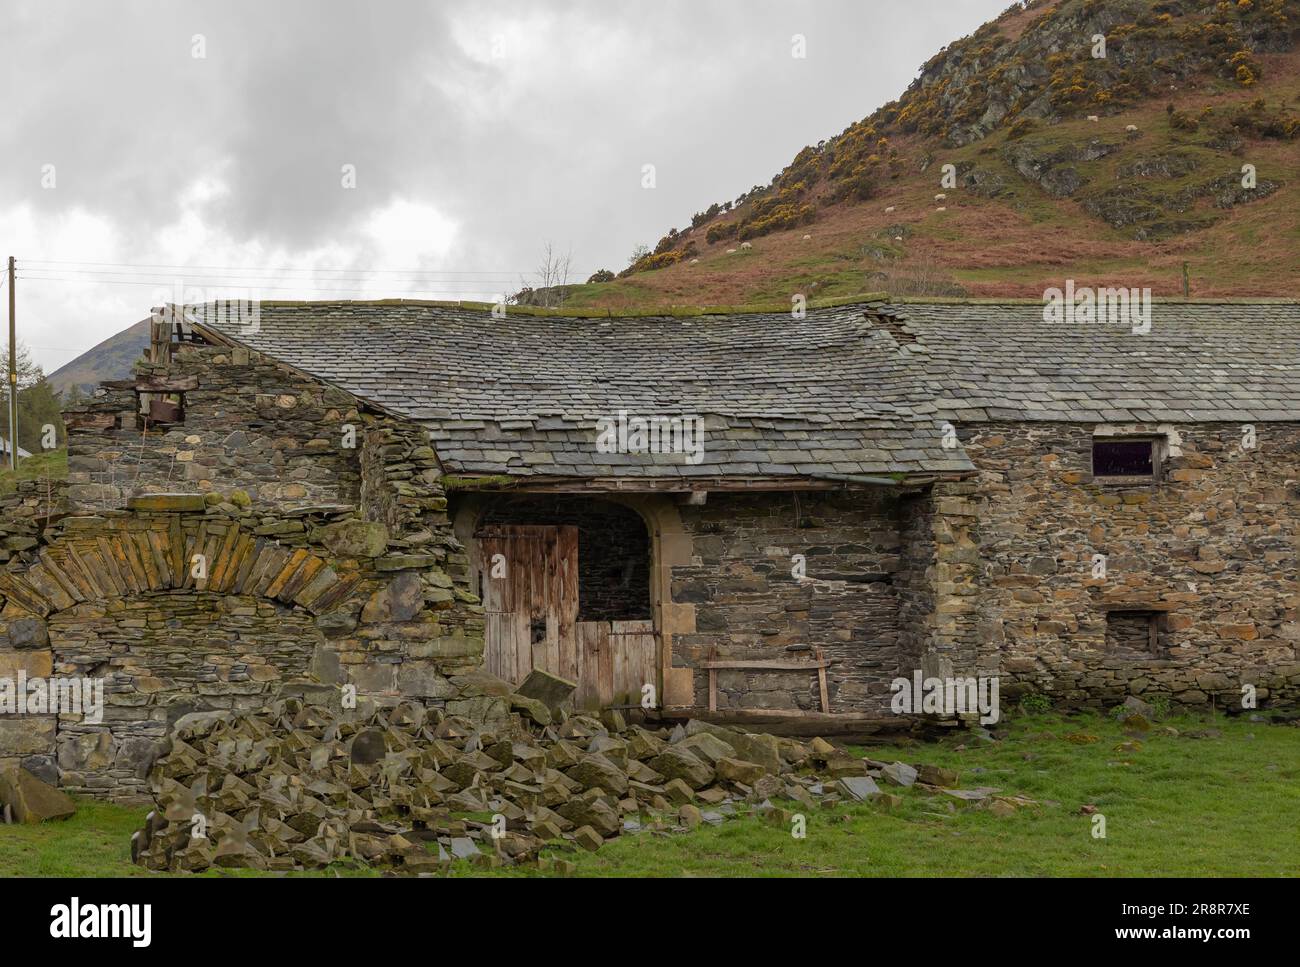 Broken down old farm building with collapsed roof Stock Photo